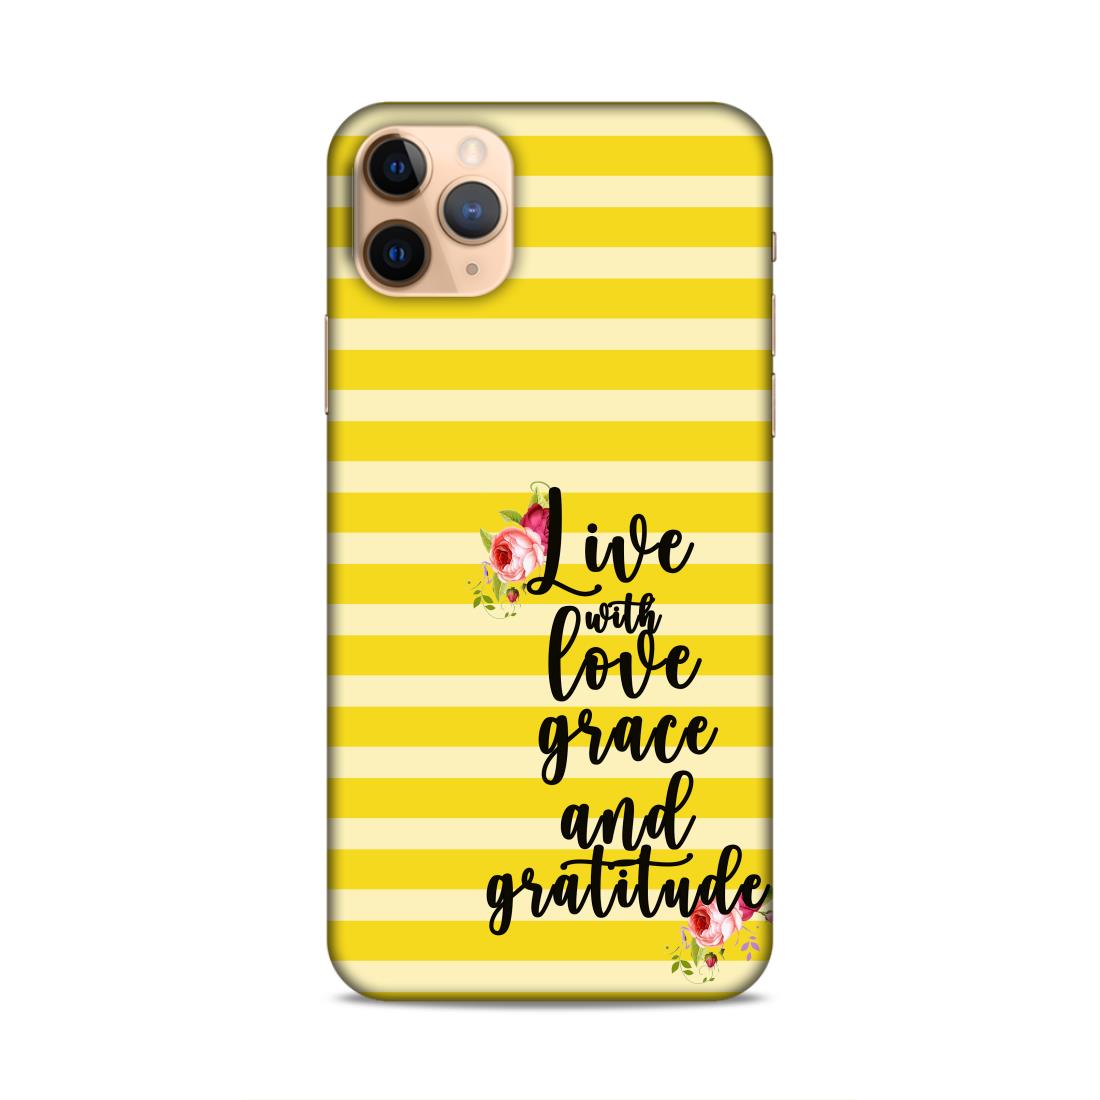 Live with Love Grace and Gratitude Hard Back Case For Apple iPhone 11 Pro